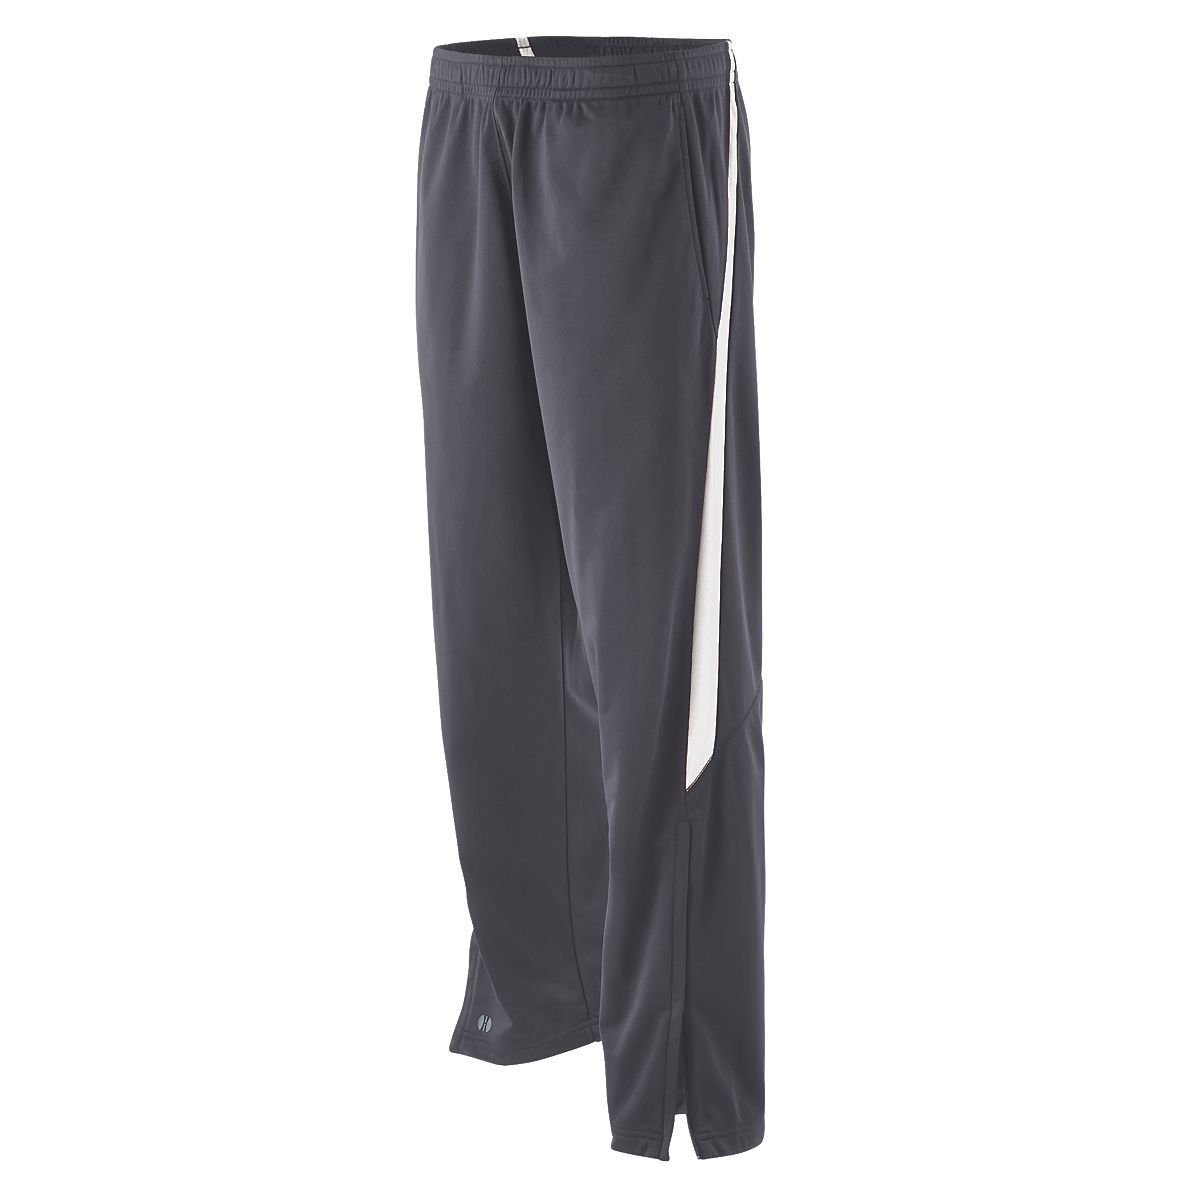 Holloway Determination Pant in Graphite/White  -Part of the Adult, Adult-Pants, Pants, Holloway product lines at KanaleyCreations.com